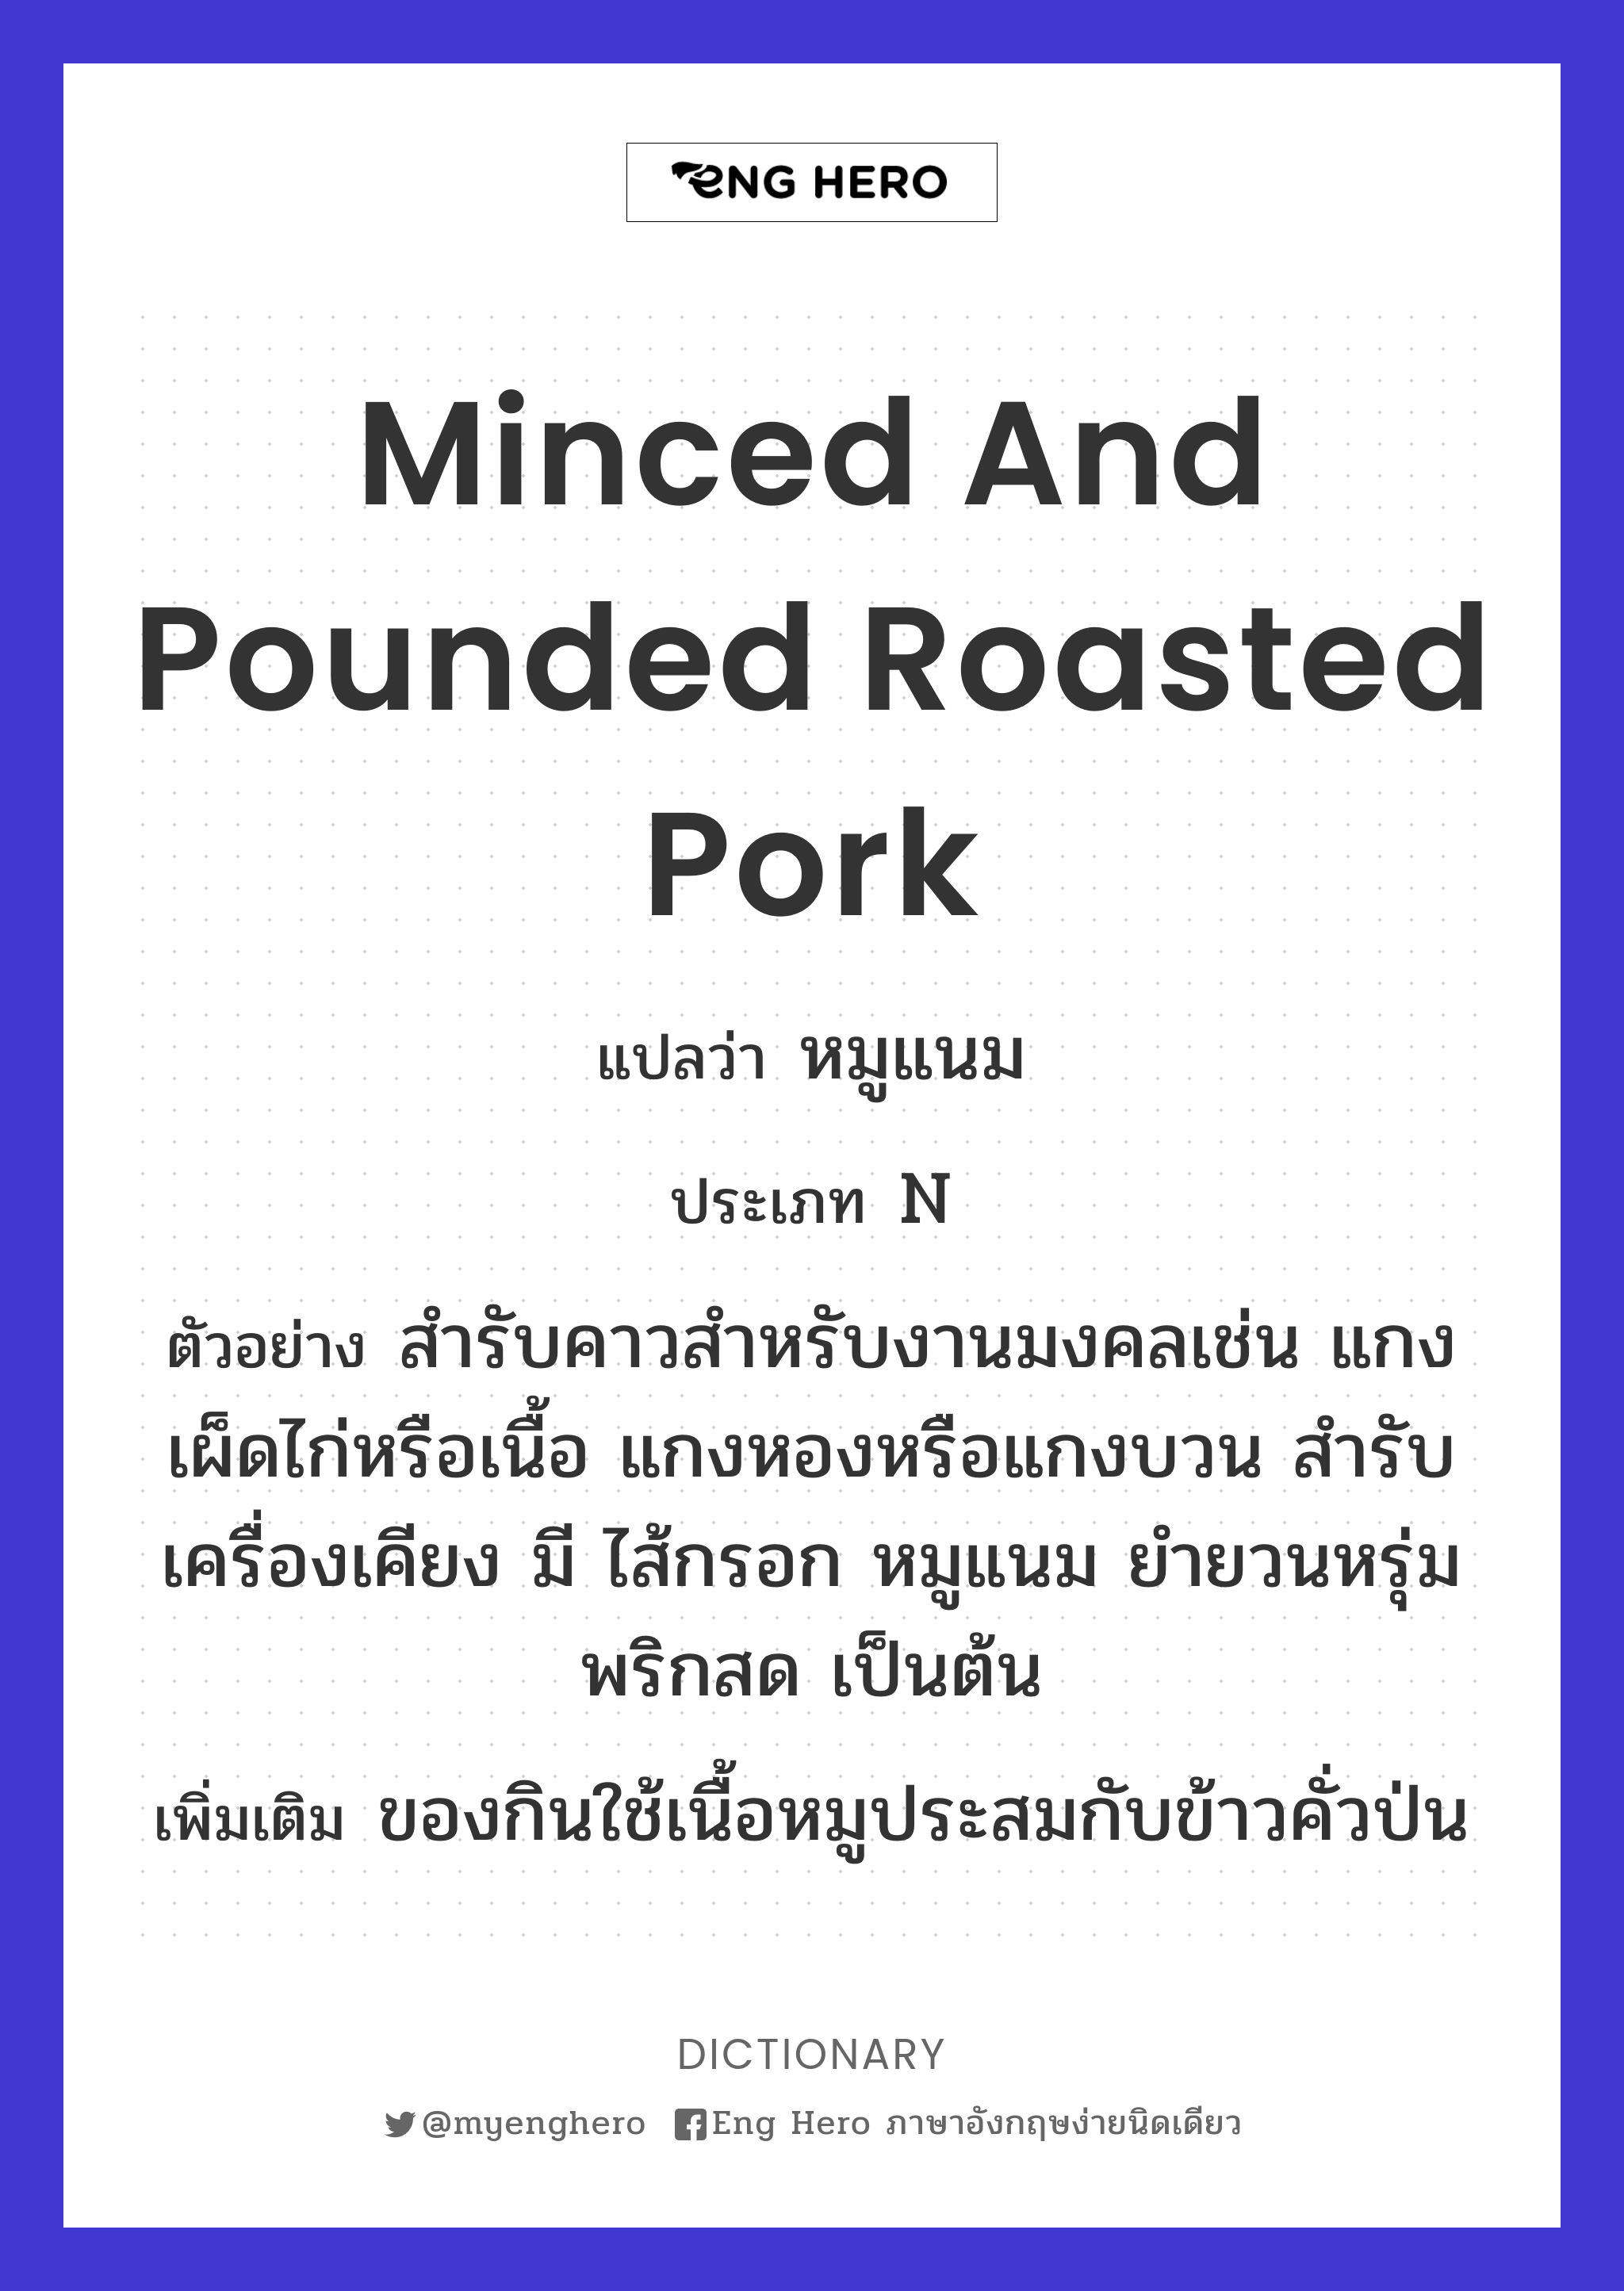 minced and pounded roasted pork